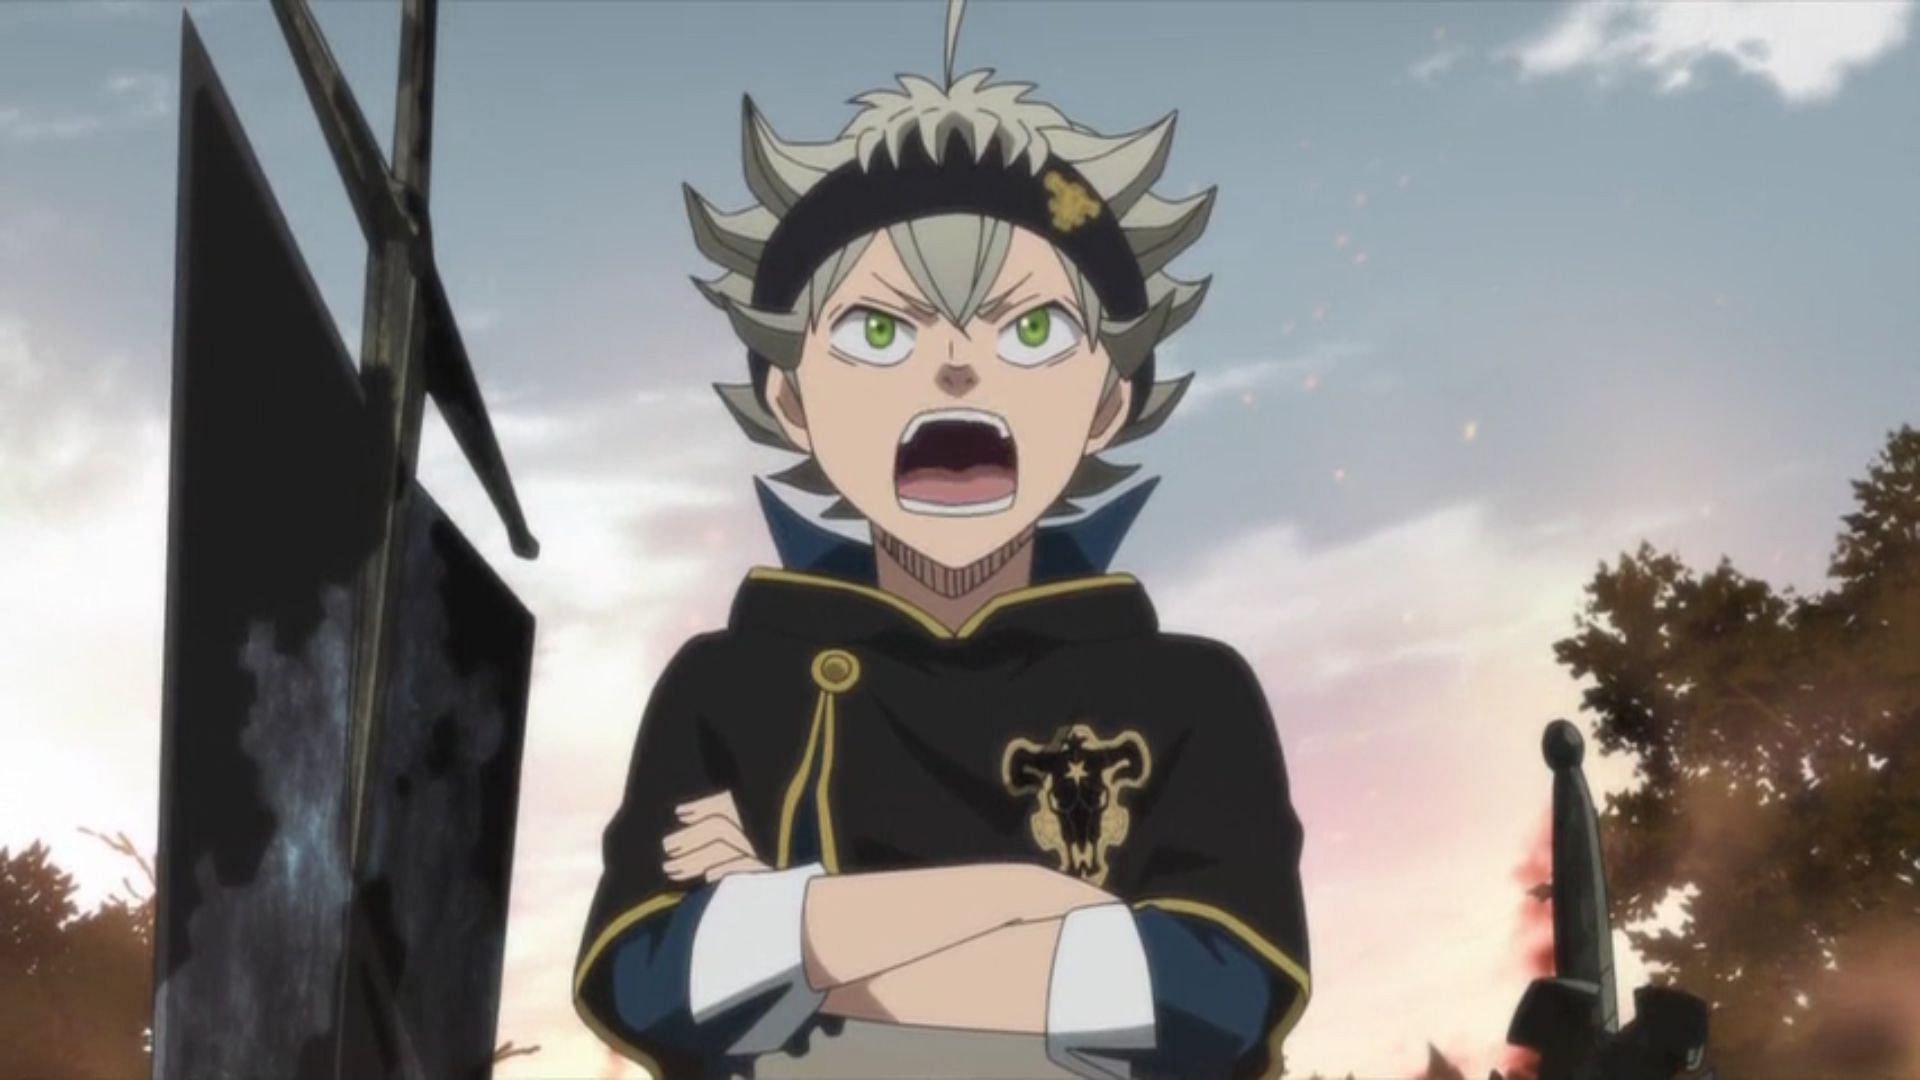 Asta&#039;s growth is the talk of the town following Black Clover Chapter 332&#039;s unofficial release (Image Credits: Yuki Tabata/Shueisha, Viz Media, Black Clover)